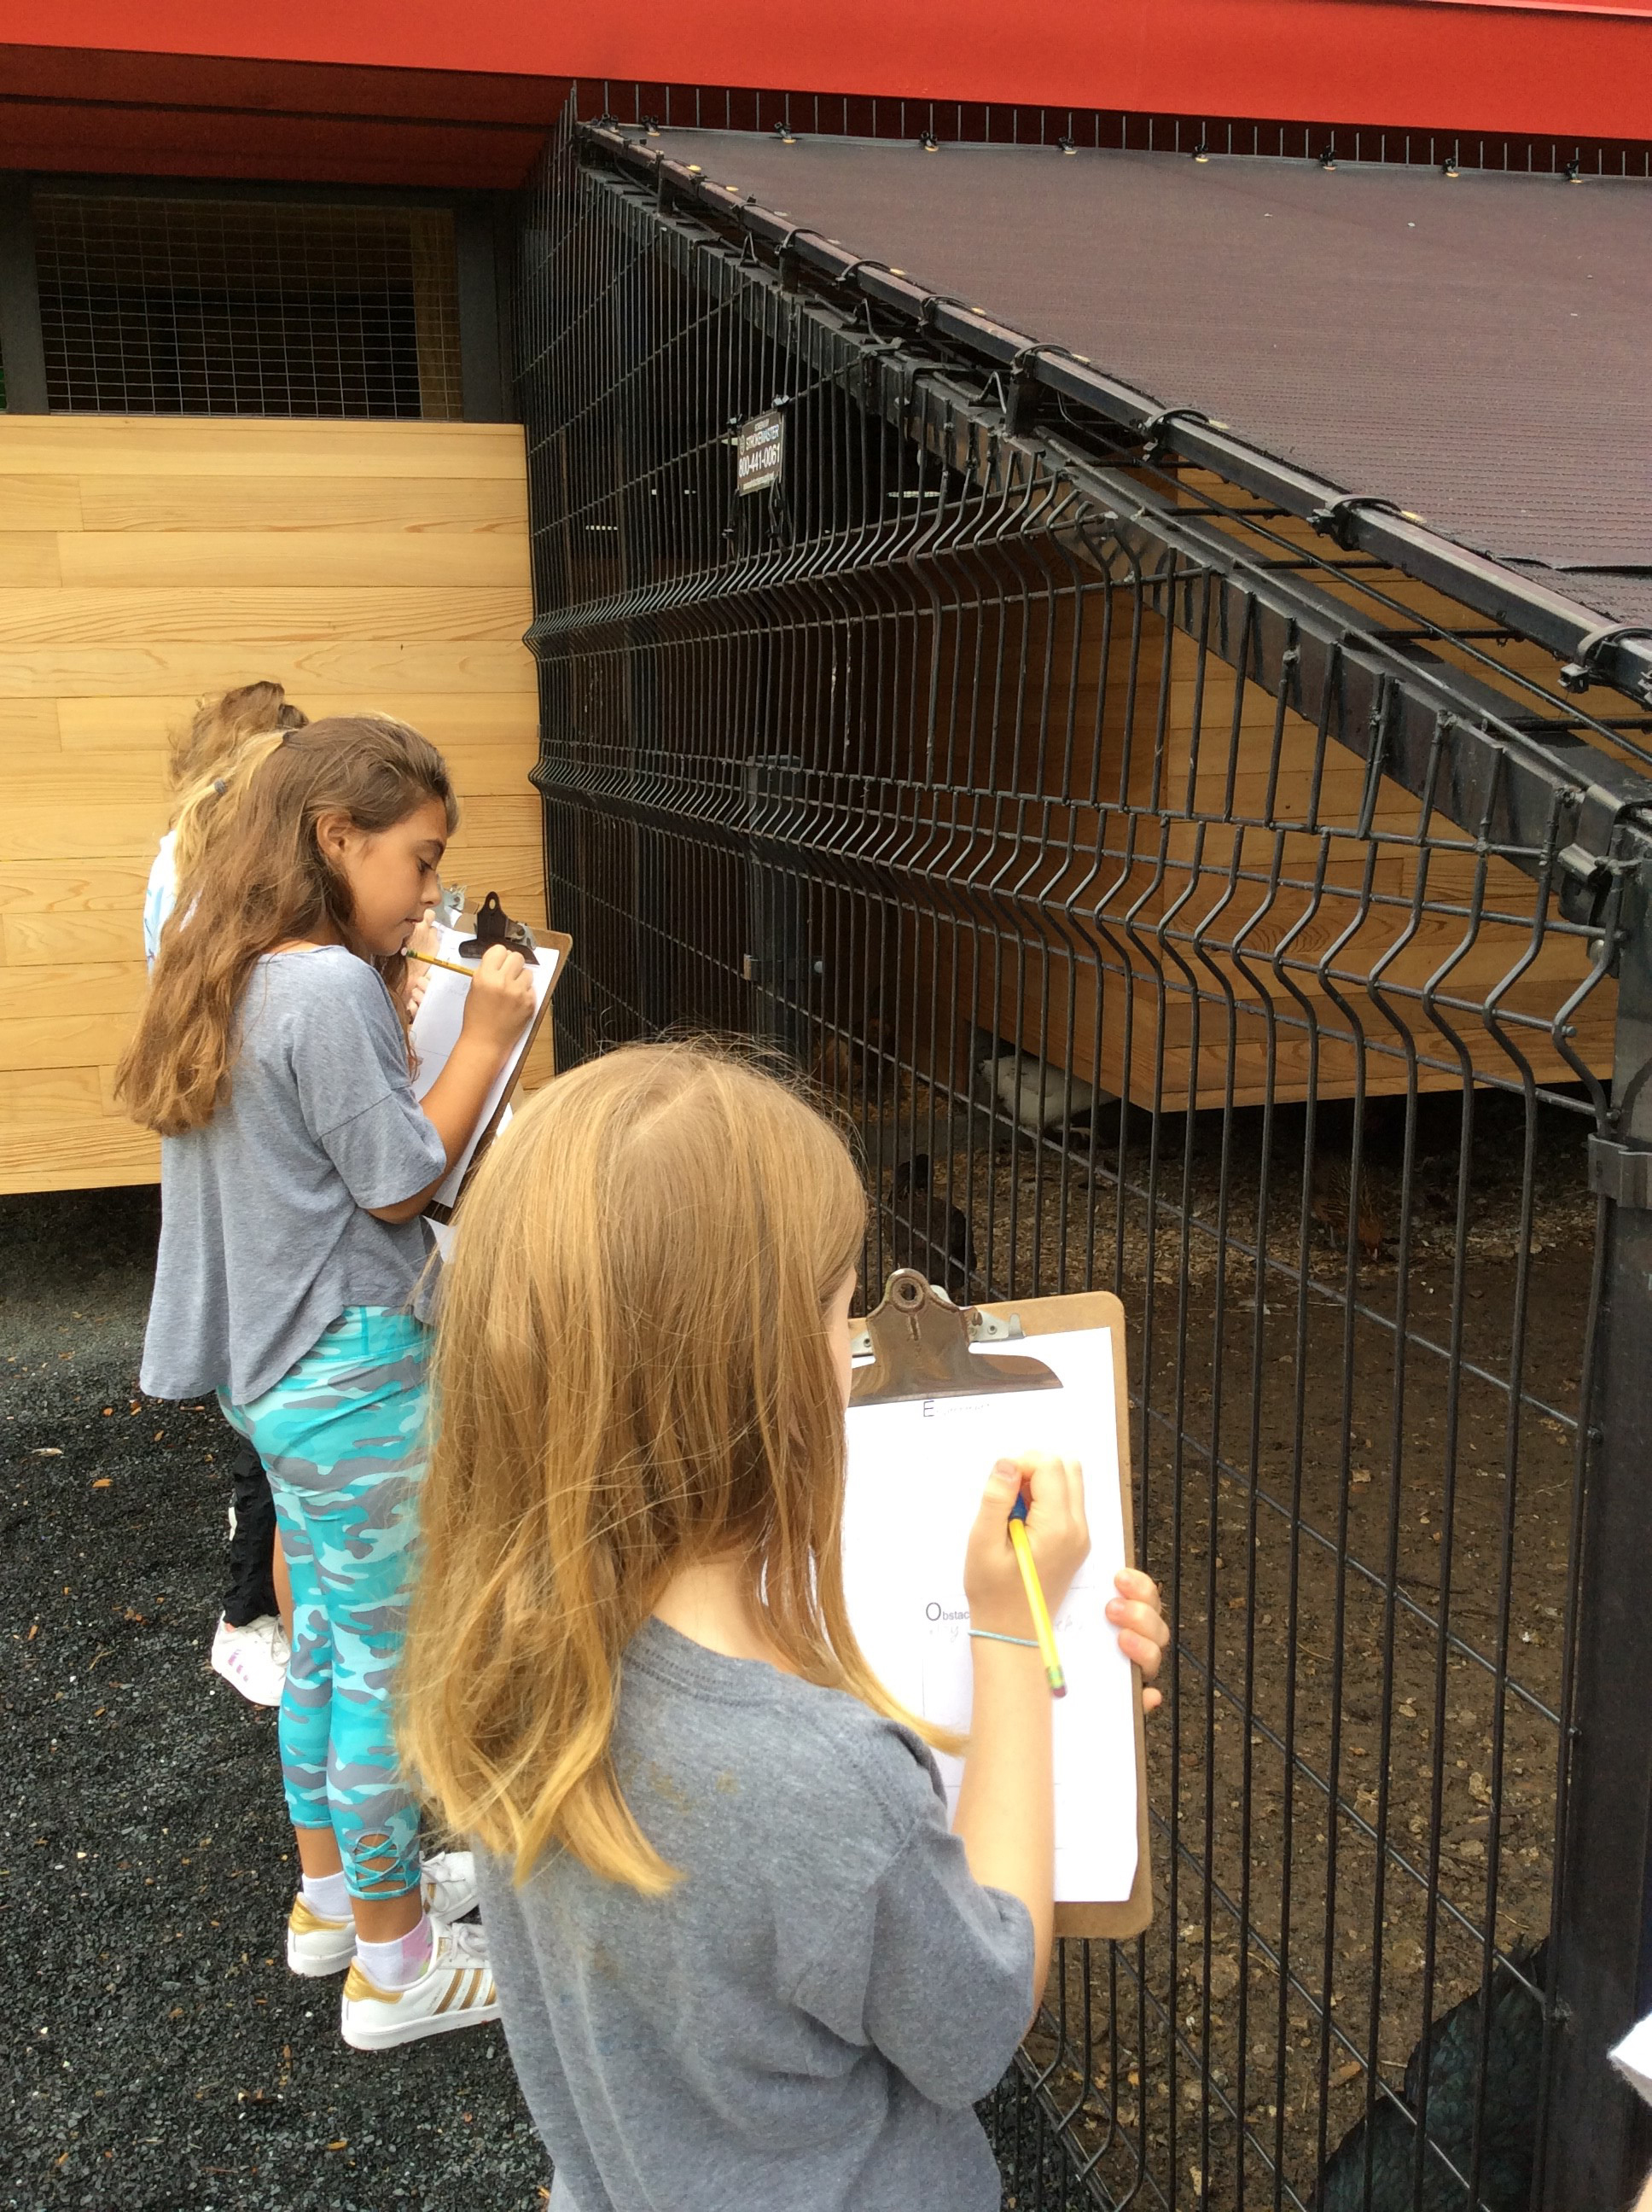 Observing chickens in their own habitat was a strategy to build empathy.